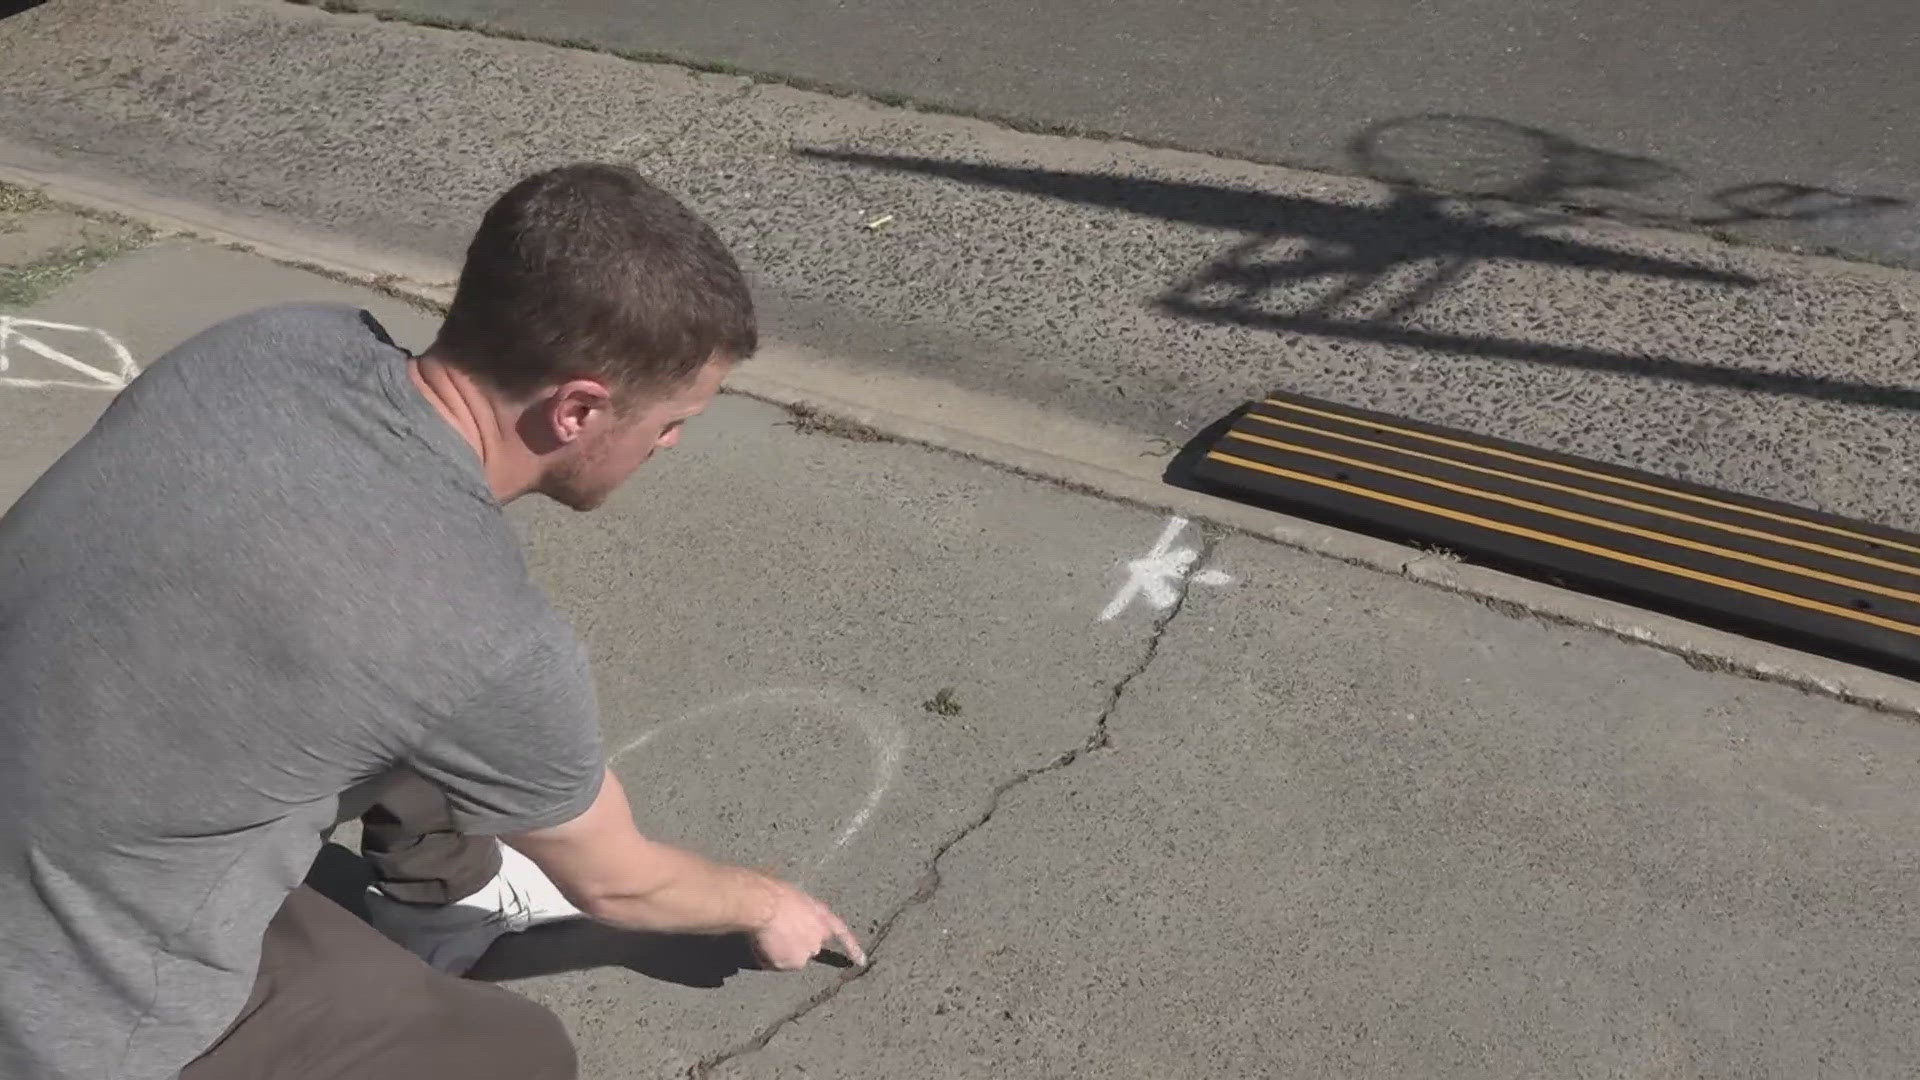 ​City leaders are looking to increase the sidewalk repair administrative fee from $40 to $80 in an effort to help close its $66 million budget deficit.